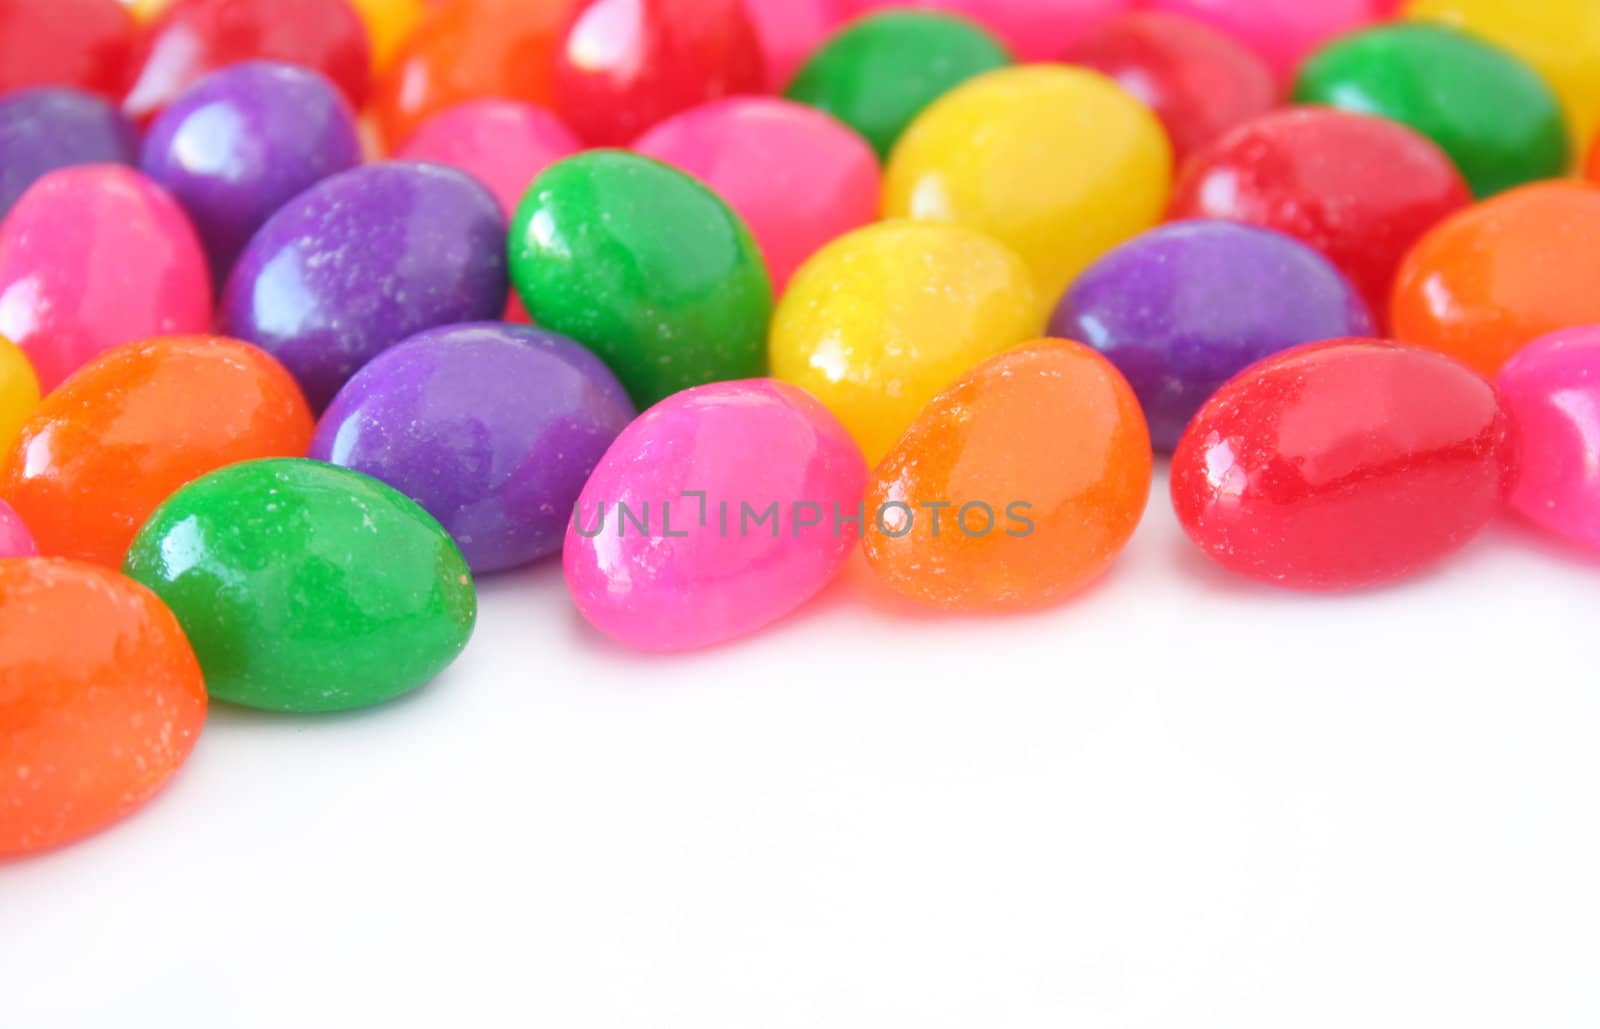 Colorful Jelly Beans by thephotoguy